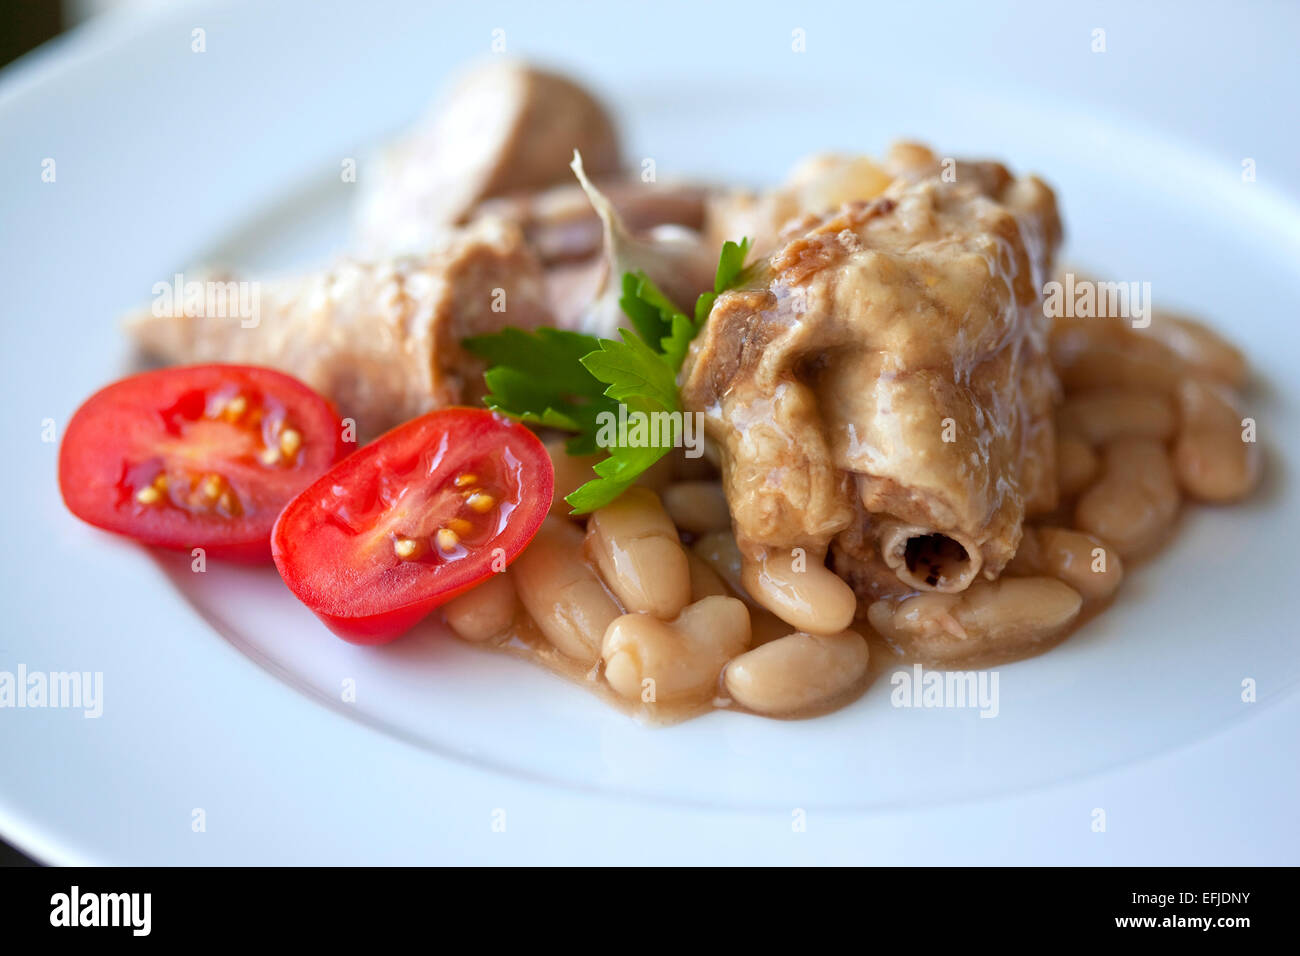 French cassoulet and tomato on a plate Stock Photo